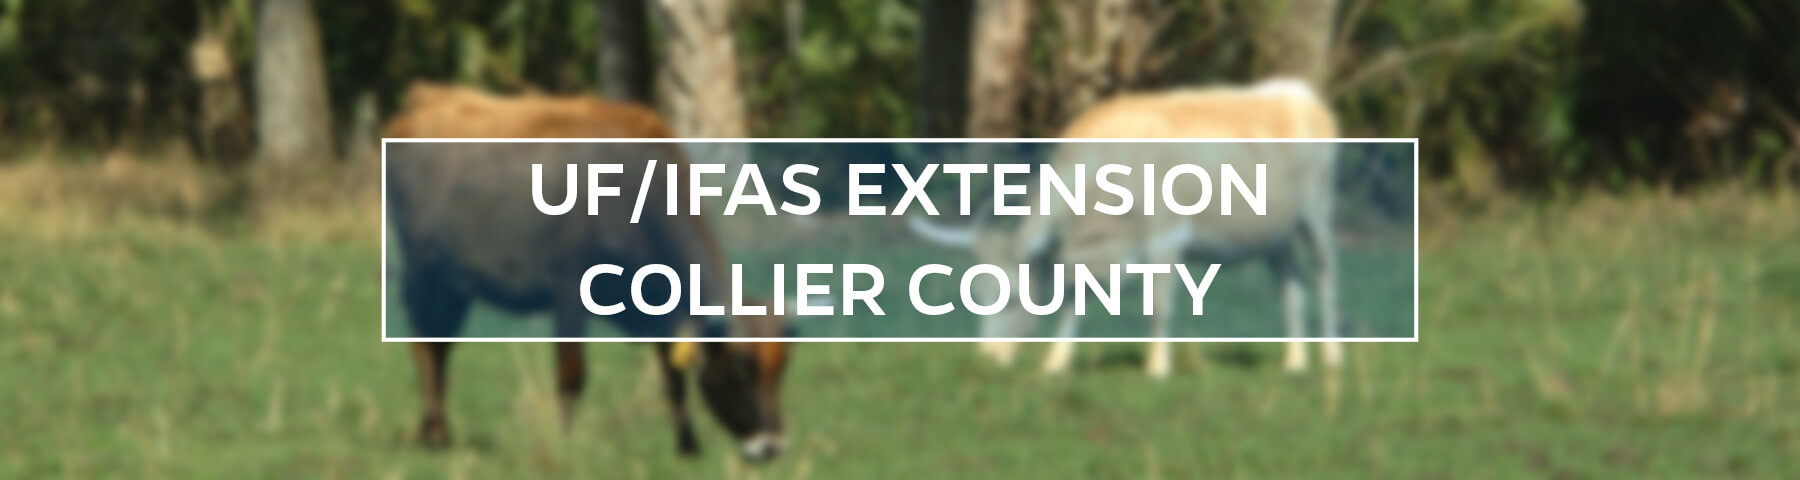 UF/IFAS Extension Collier County